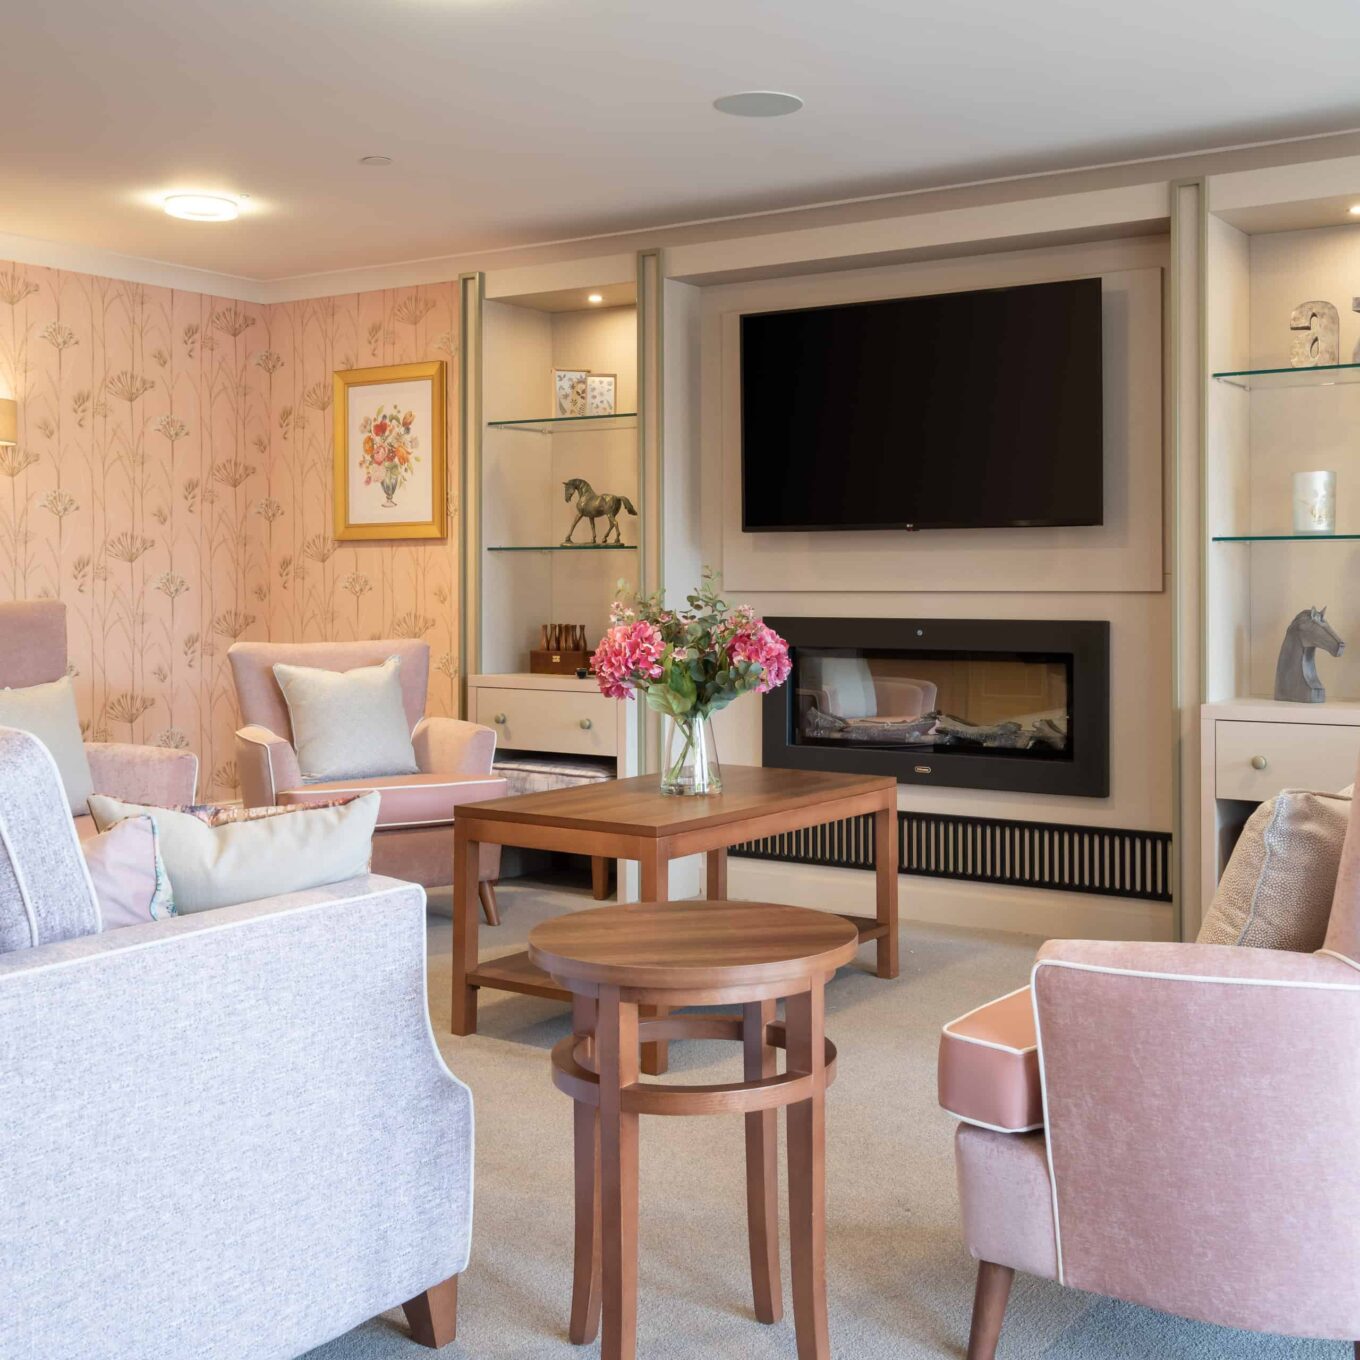 Lounge area with chairs, coffee table and TV at Elmbook Court Care Home in Wantage